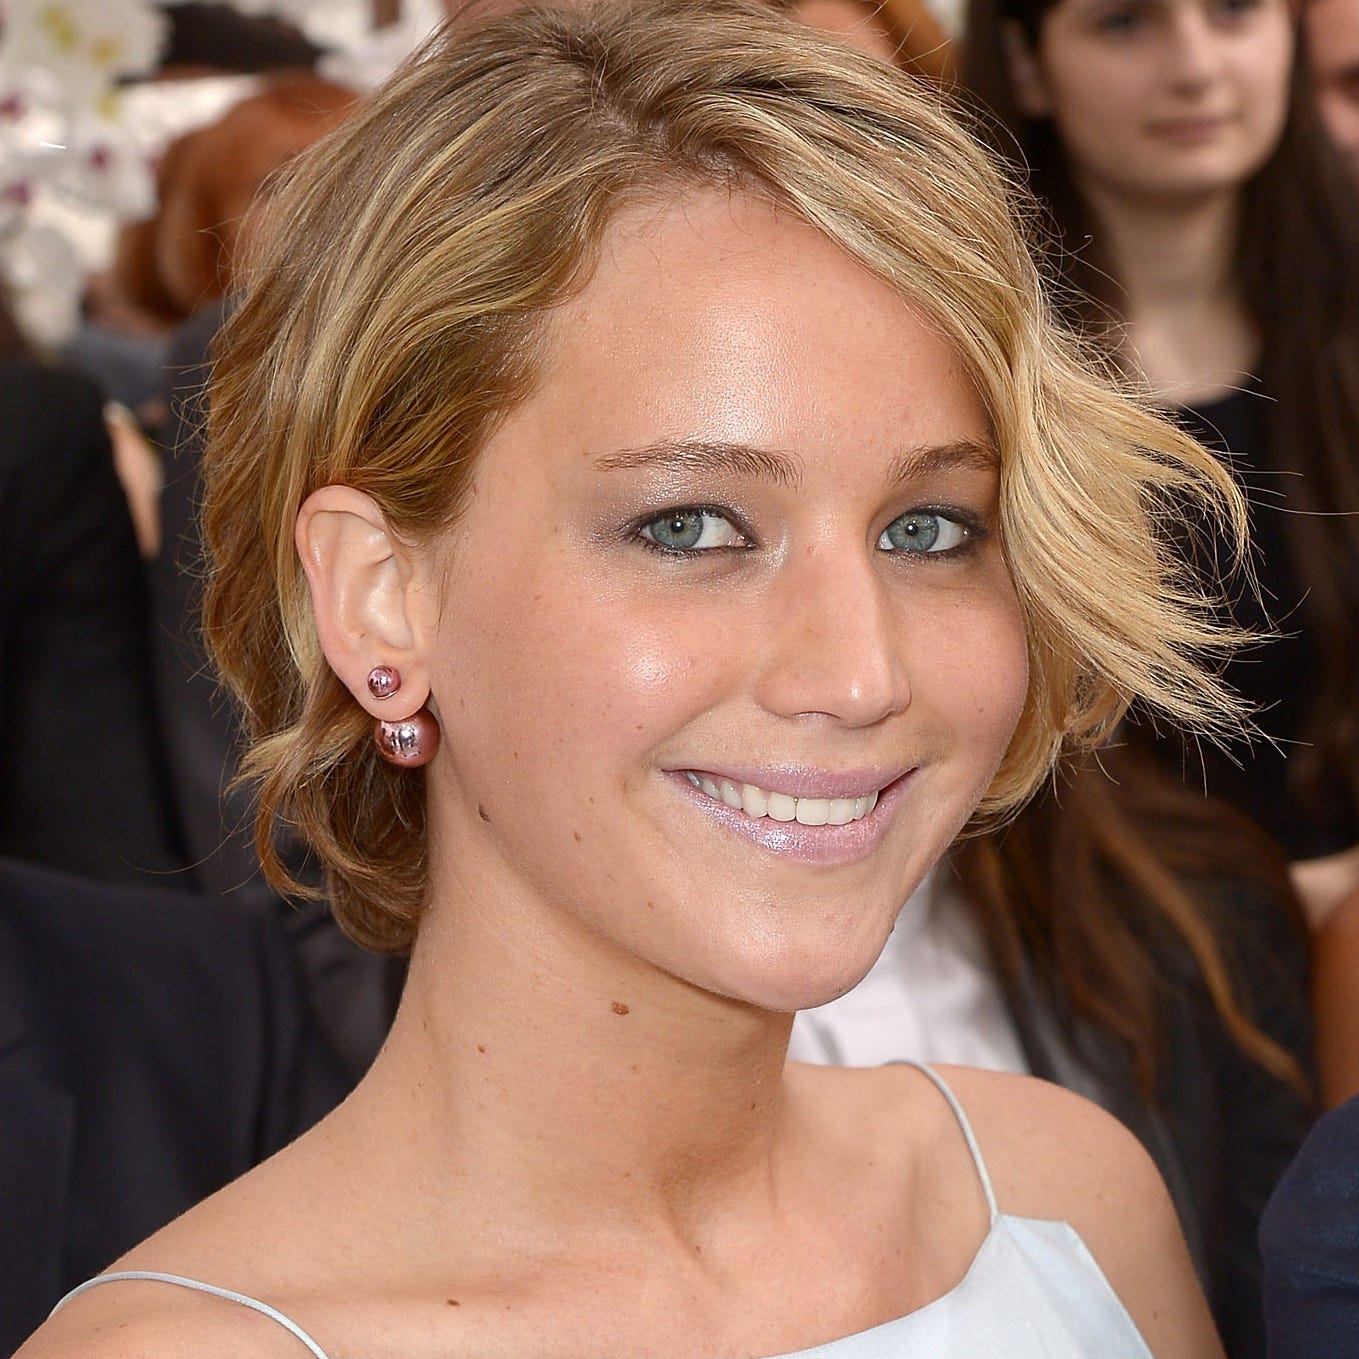 J. Law on phone hack: 'I'm not crying about it anymore'